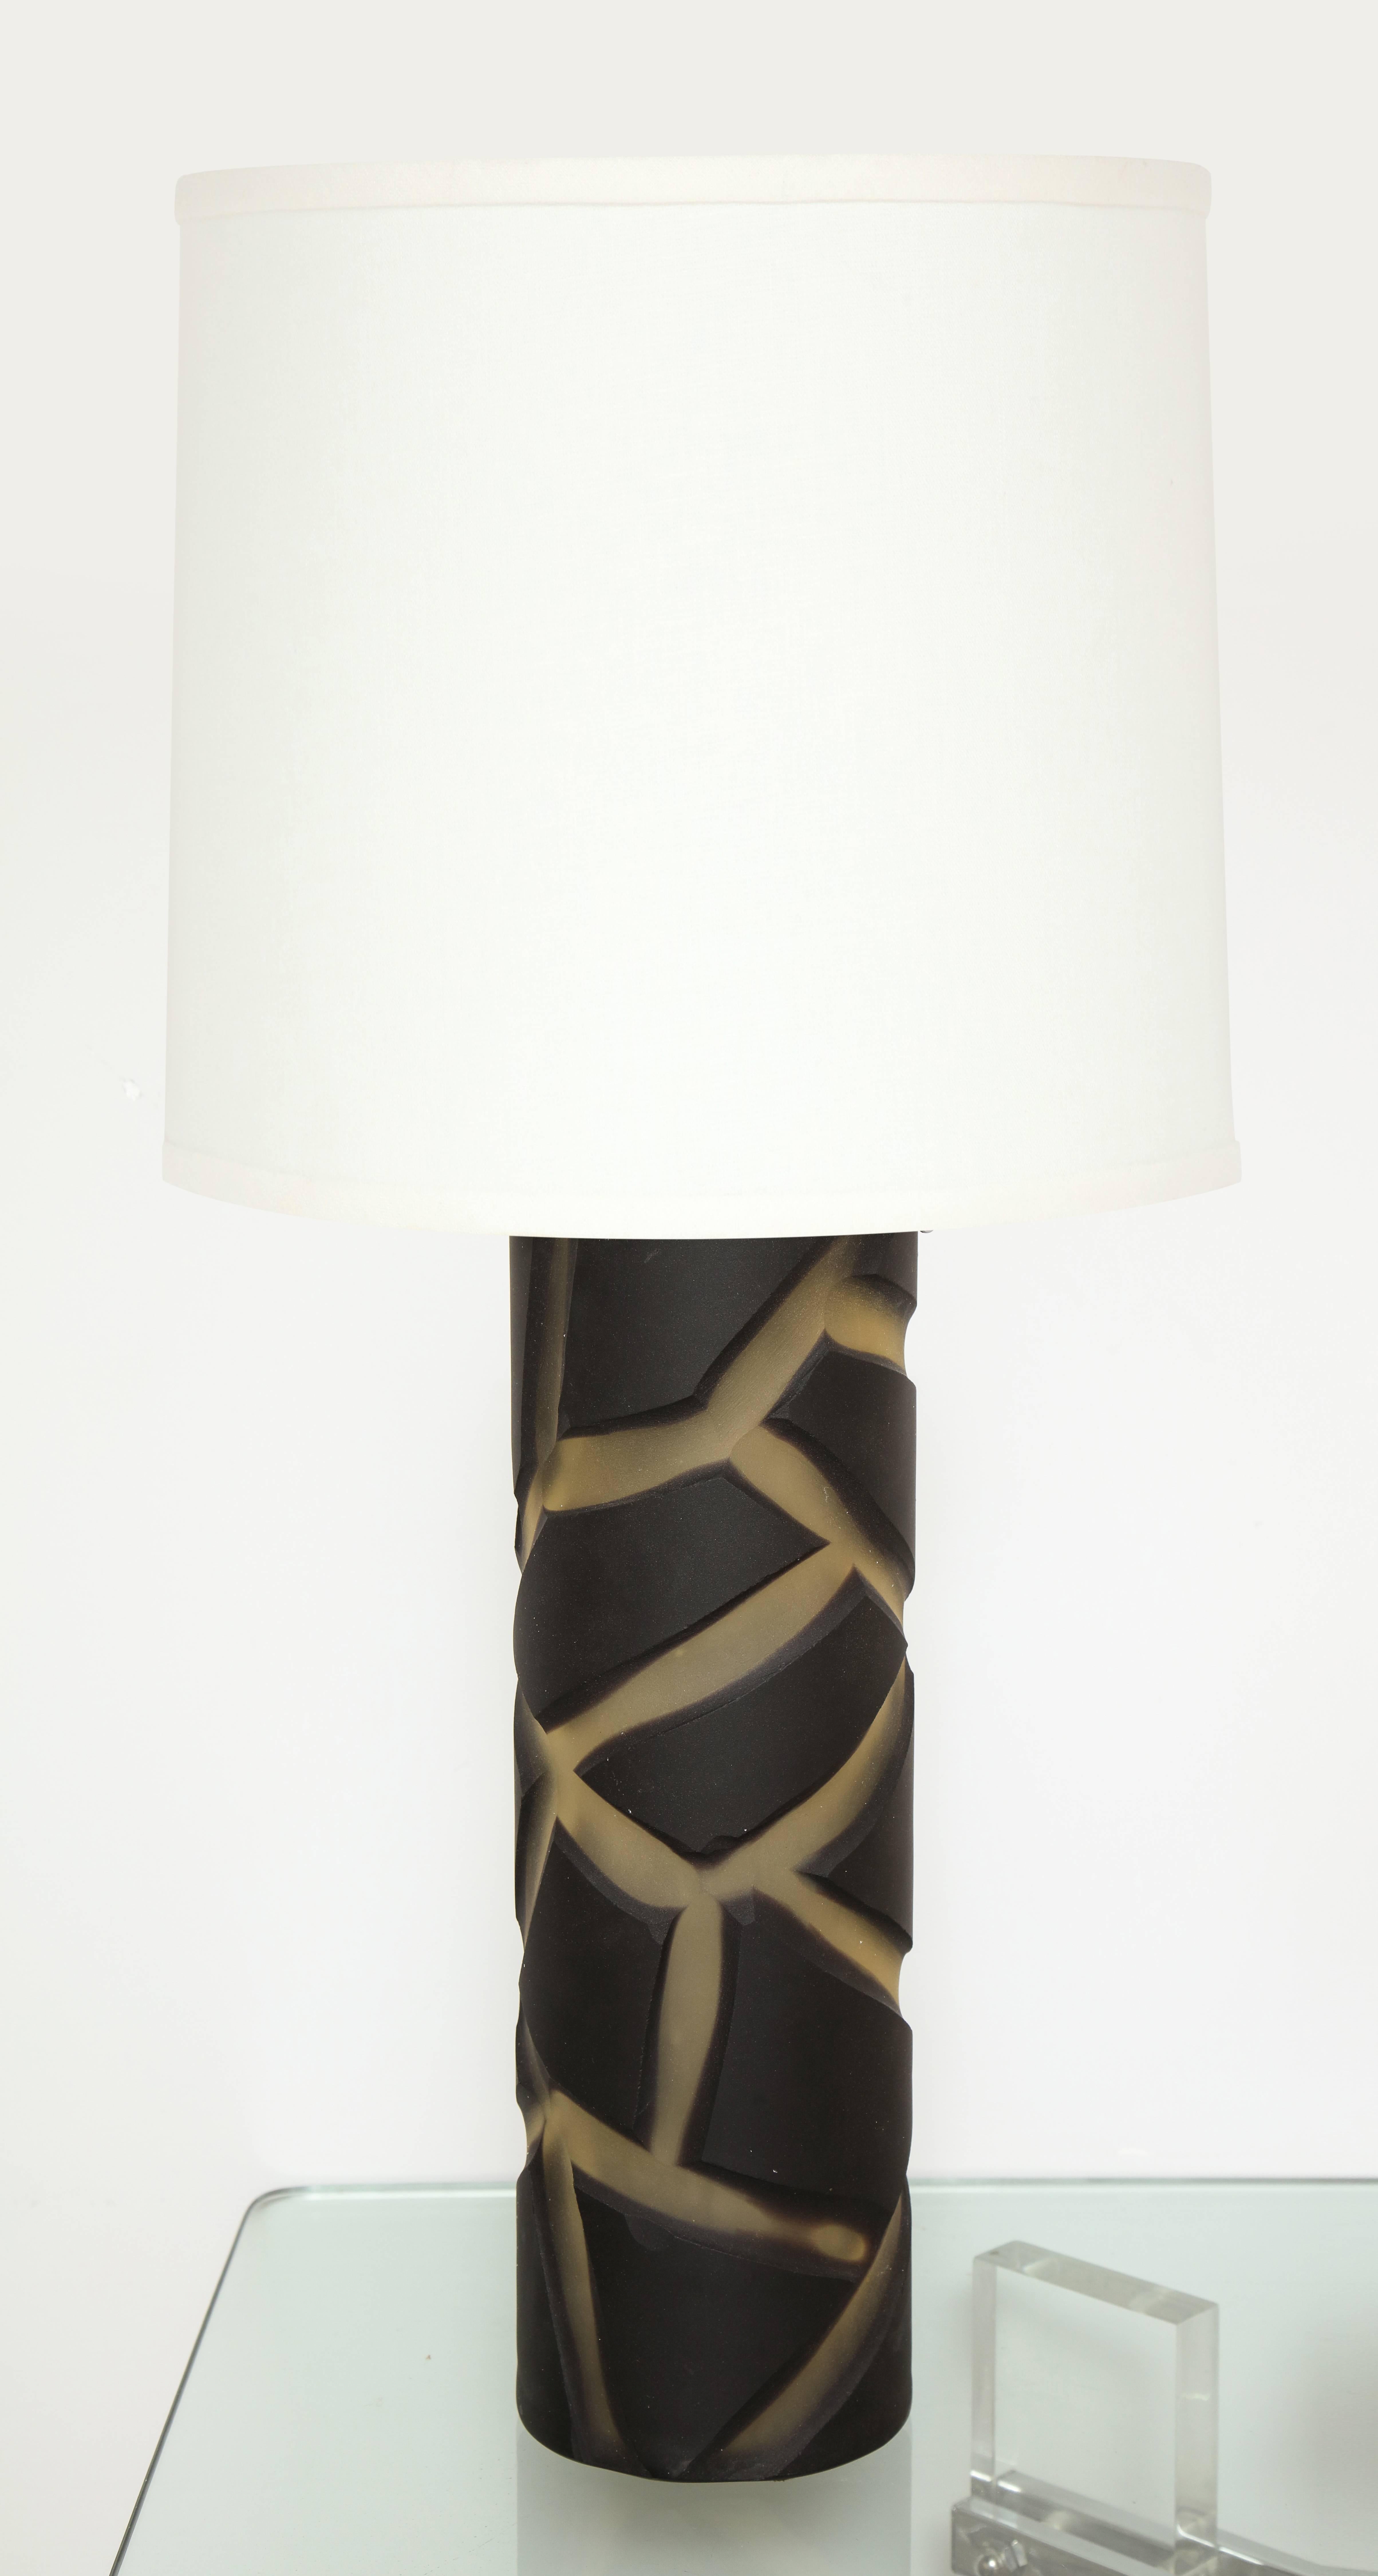 A elegant pair of frosted black and white glass table lamps with a deep cut abstract geometric design in Murano glass by Vivarini signed on the base.